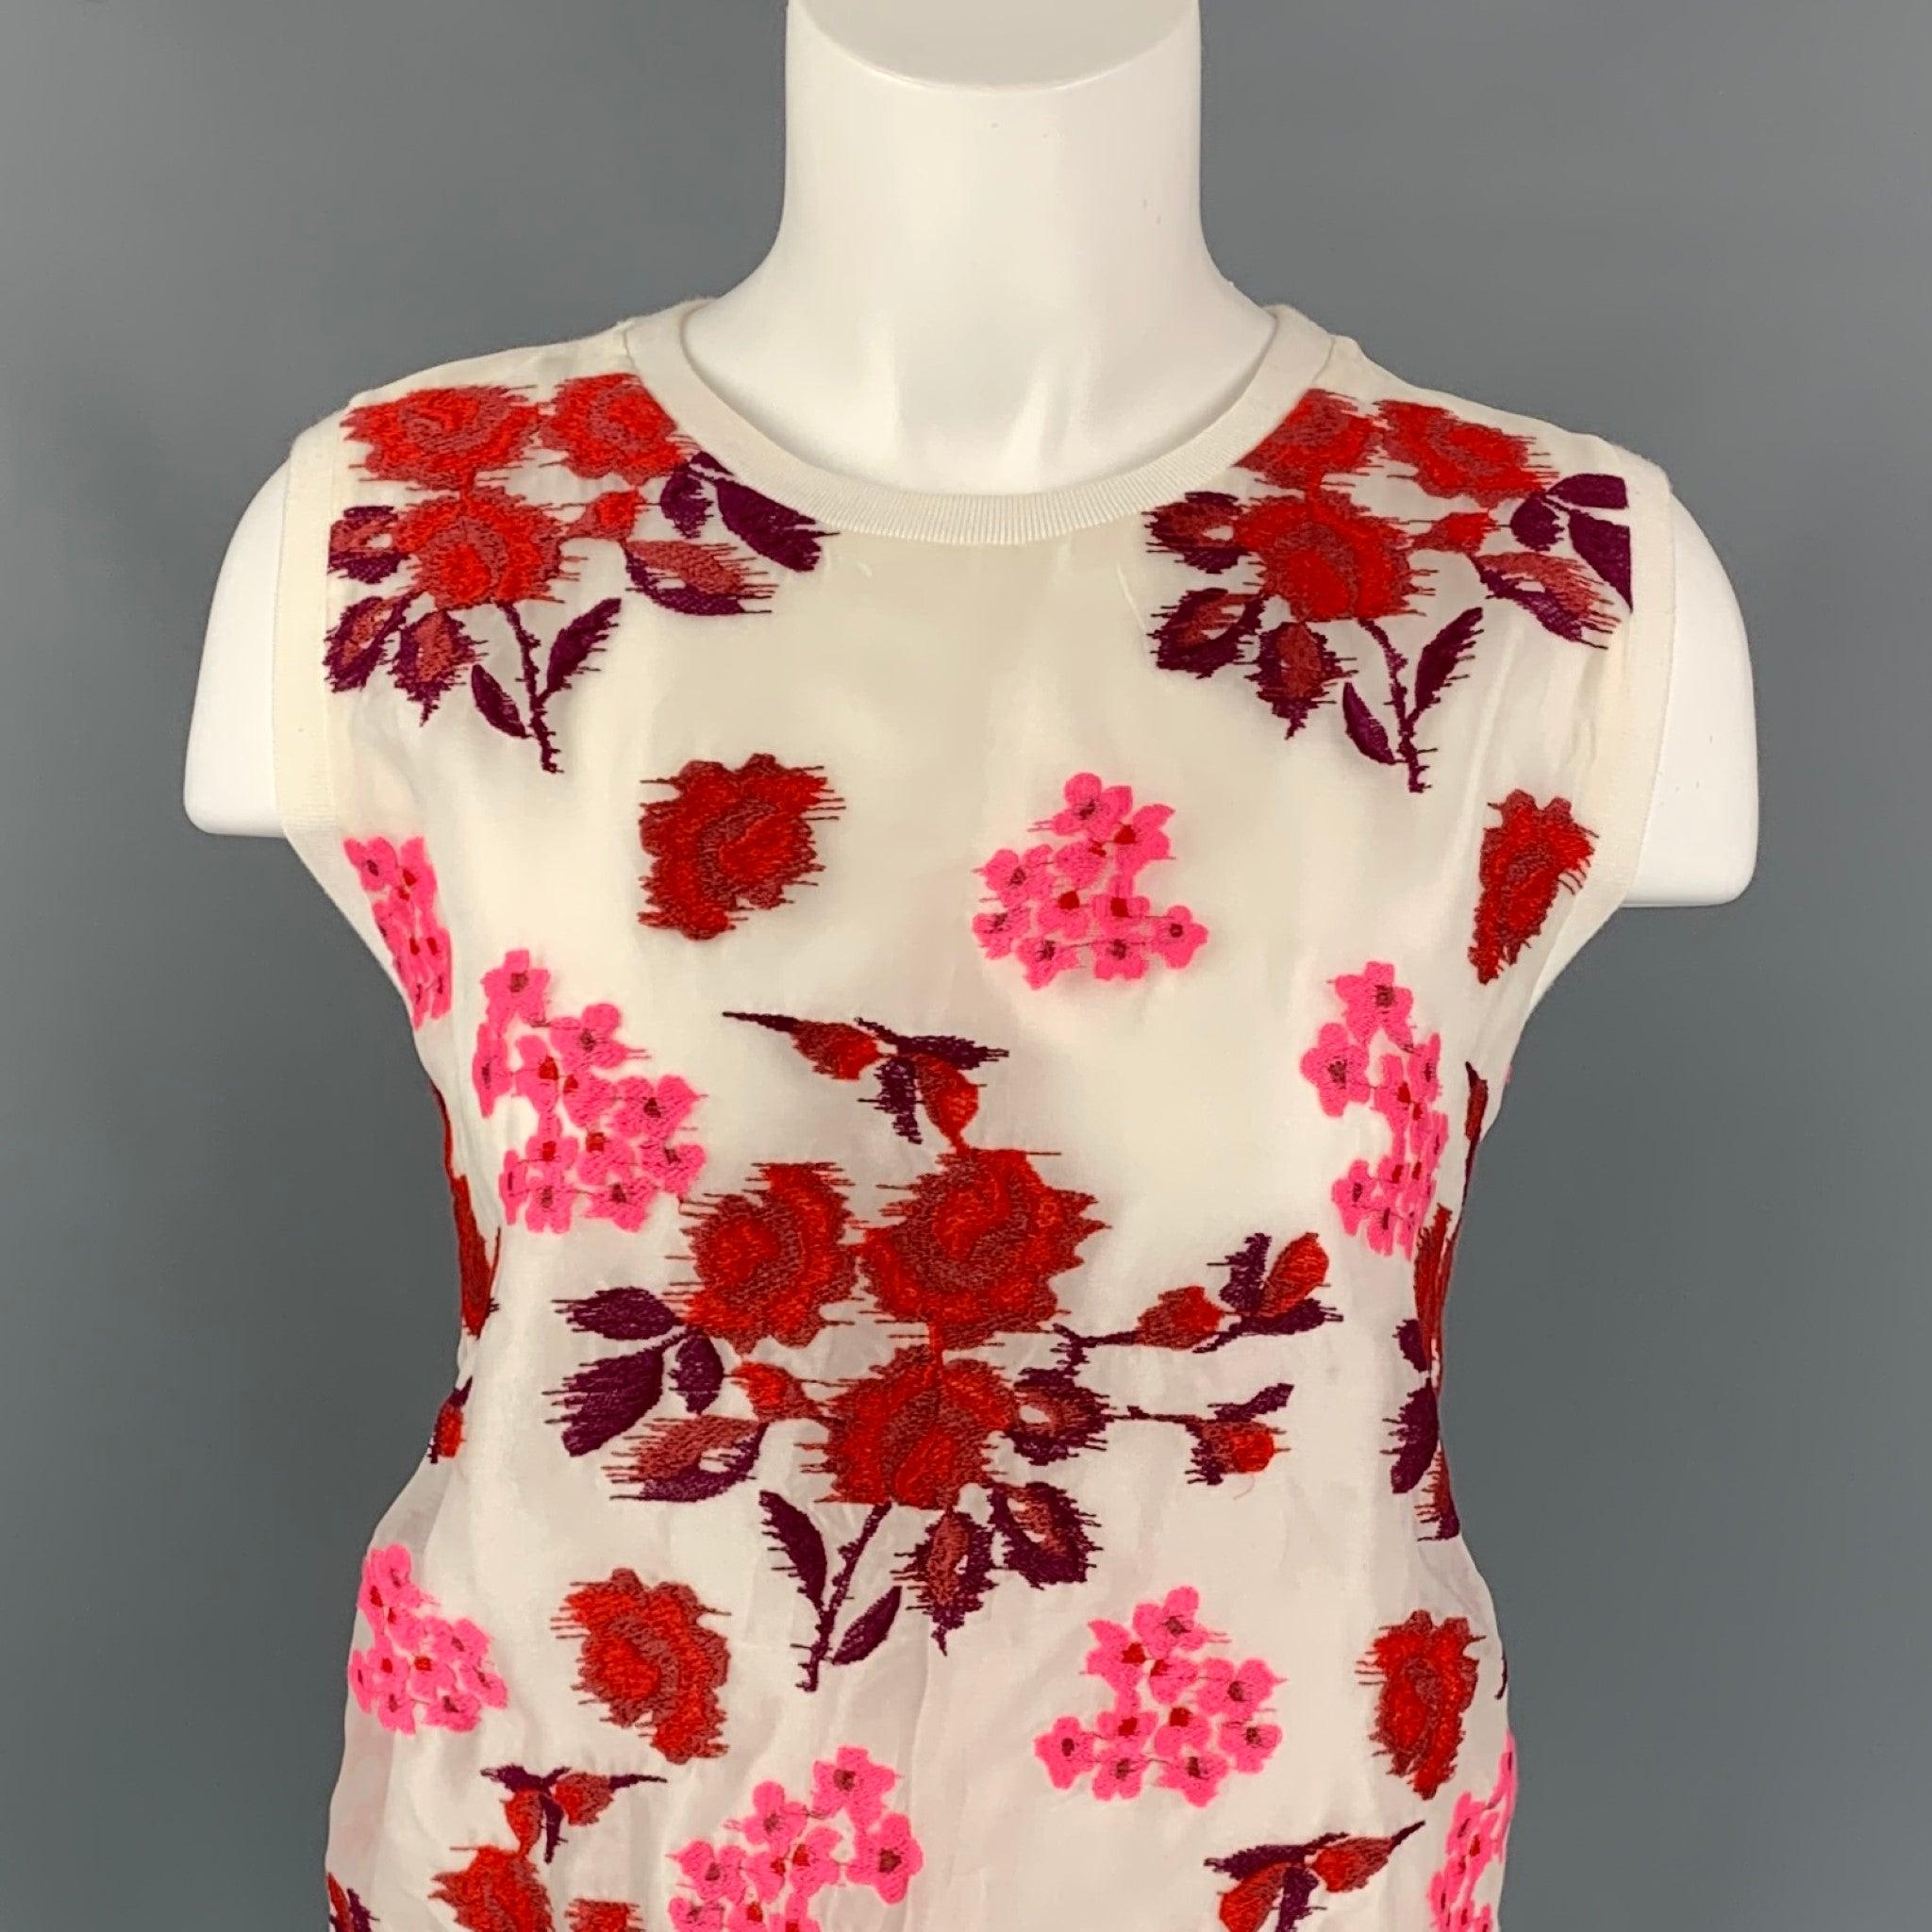 GIAMBATTISTA VALLI dress top coms in a white & burgundy floral cotton / silk featuring a sleeveless style, ribbed hem, and a crew-neck. Made in Italy.
Very Good
Pre-Owned Condition. 

Marked:   42/S 

Measurements: 
 
Shoulder: 14.5 inches  Bust: 42